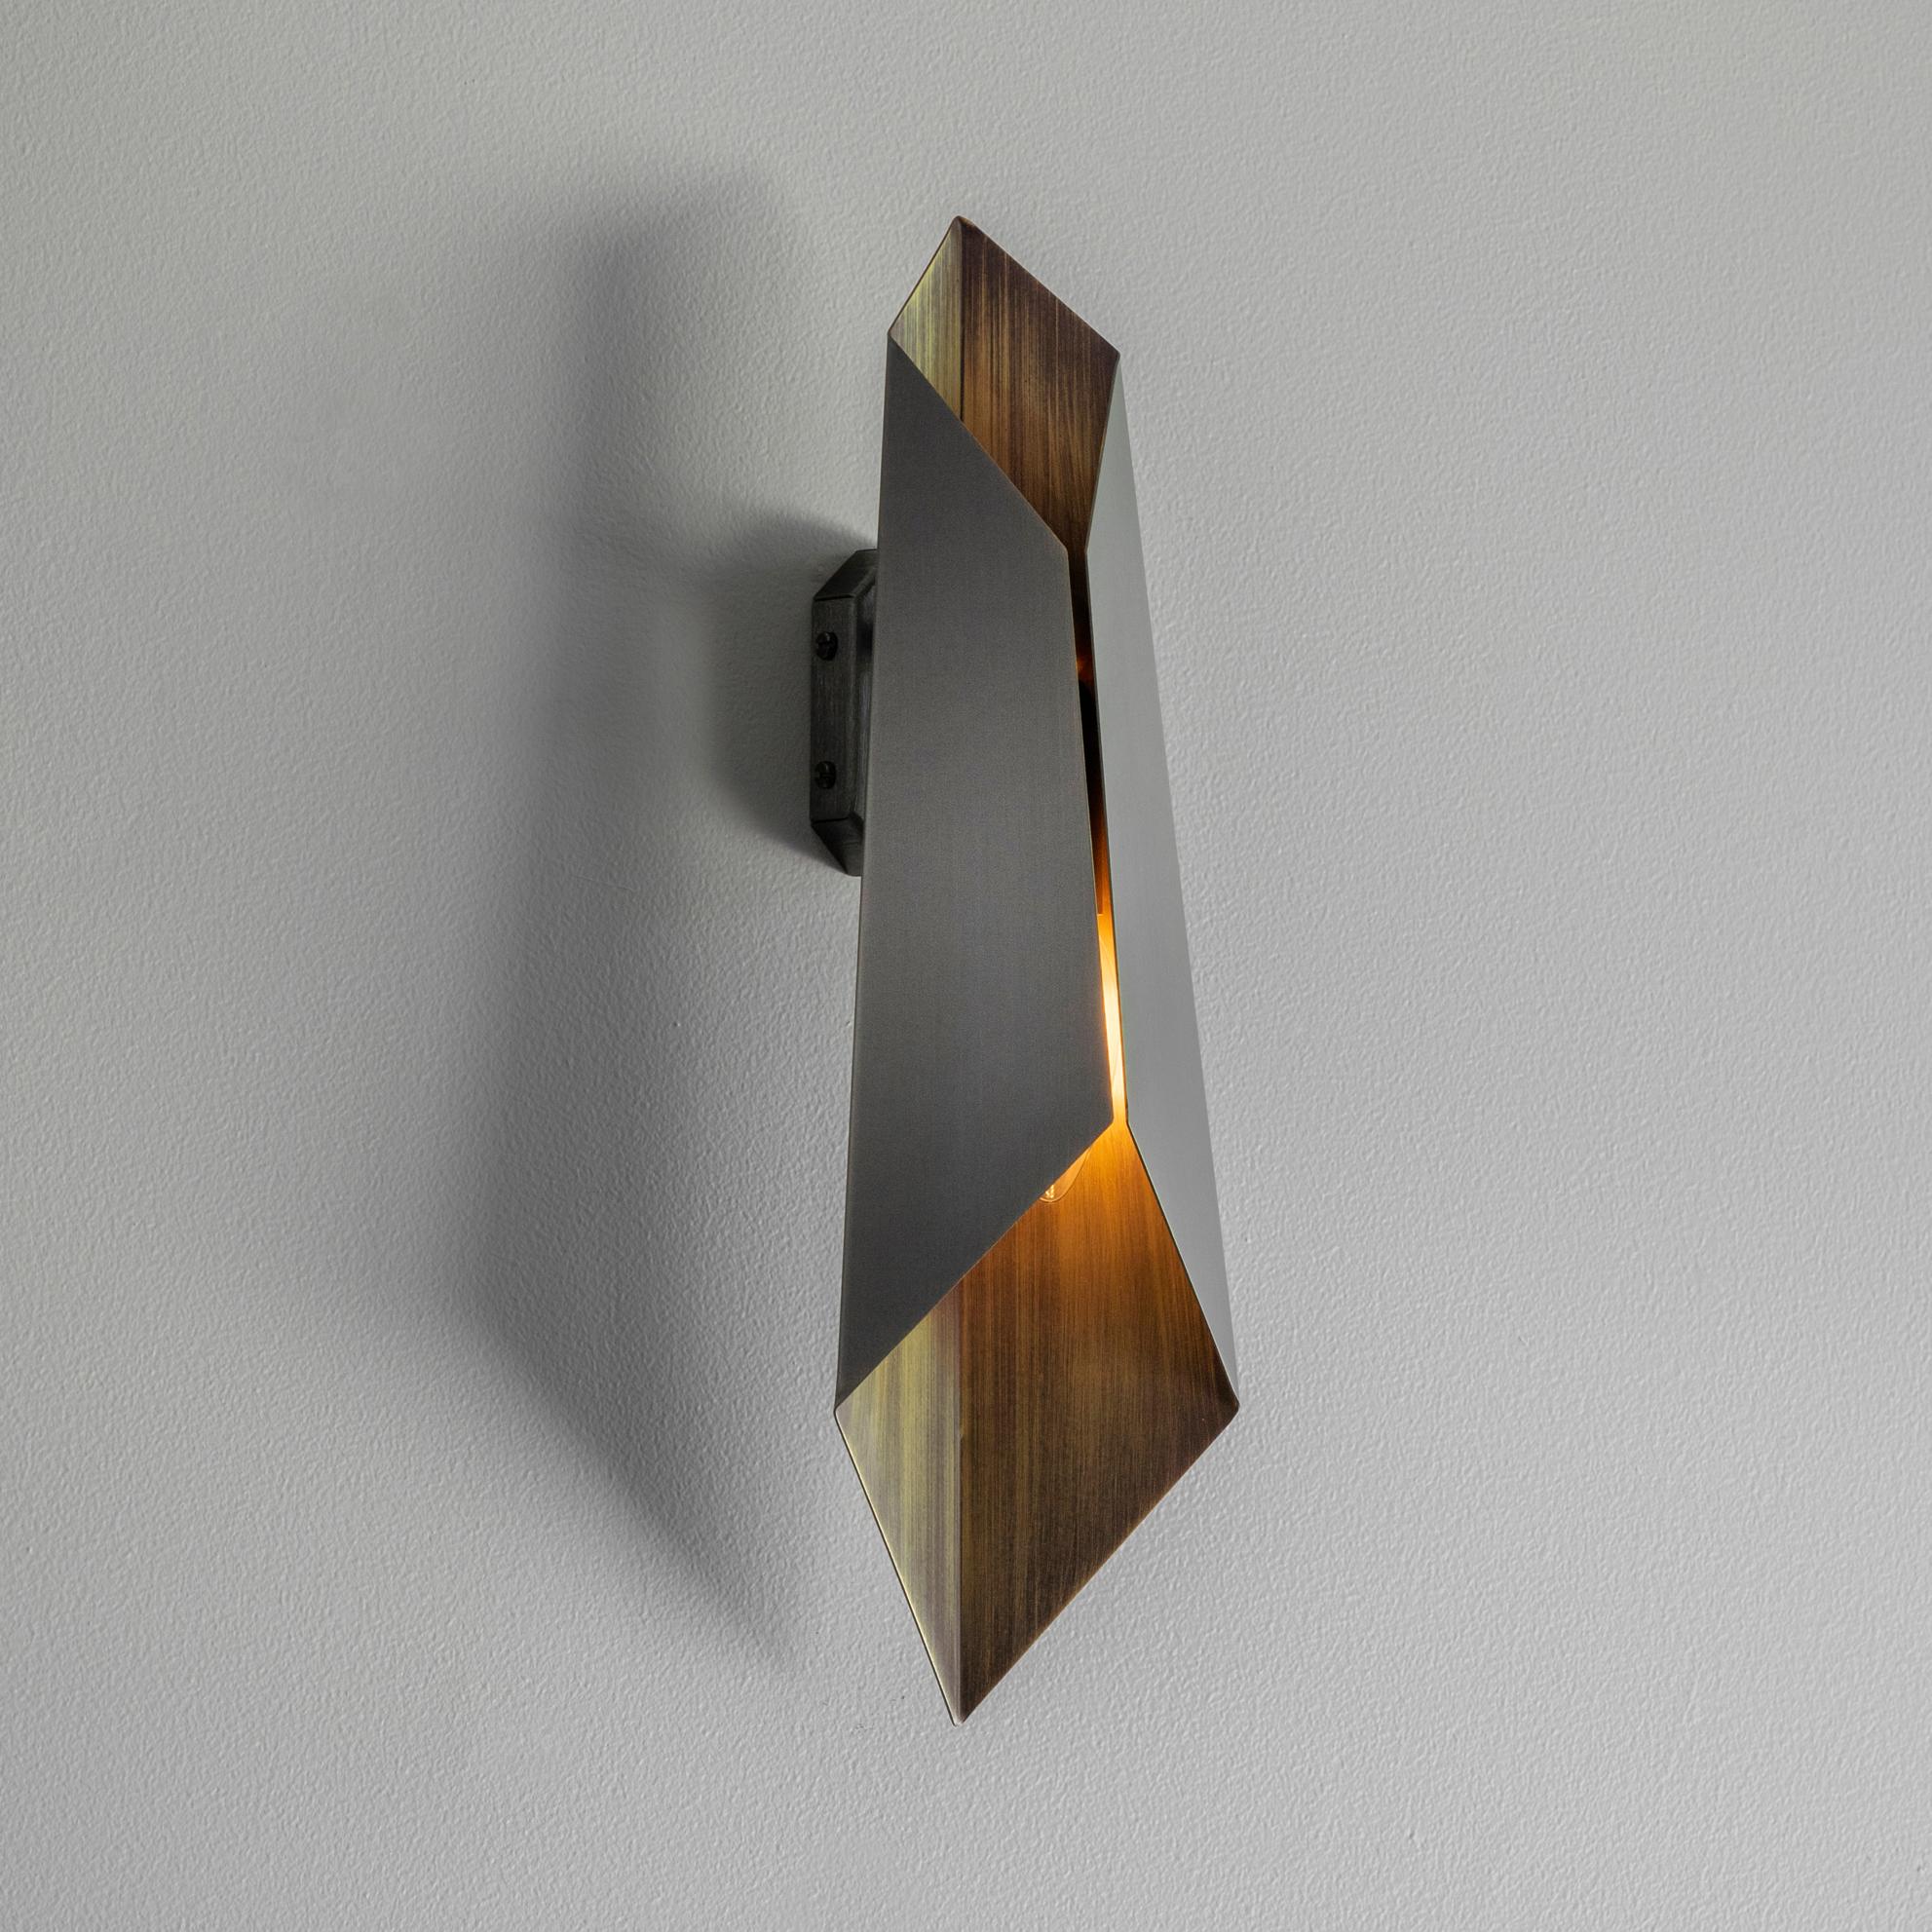 A folded bronze wall light, patinated to a dark bronze colour and hand-grained on the inside surface to reflect the light. Use singly or group together for impact.

Designed and handmade by Tigermoth Lighting on the banks of the river Thames in